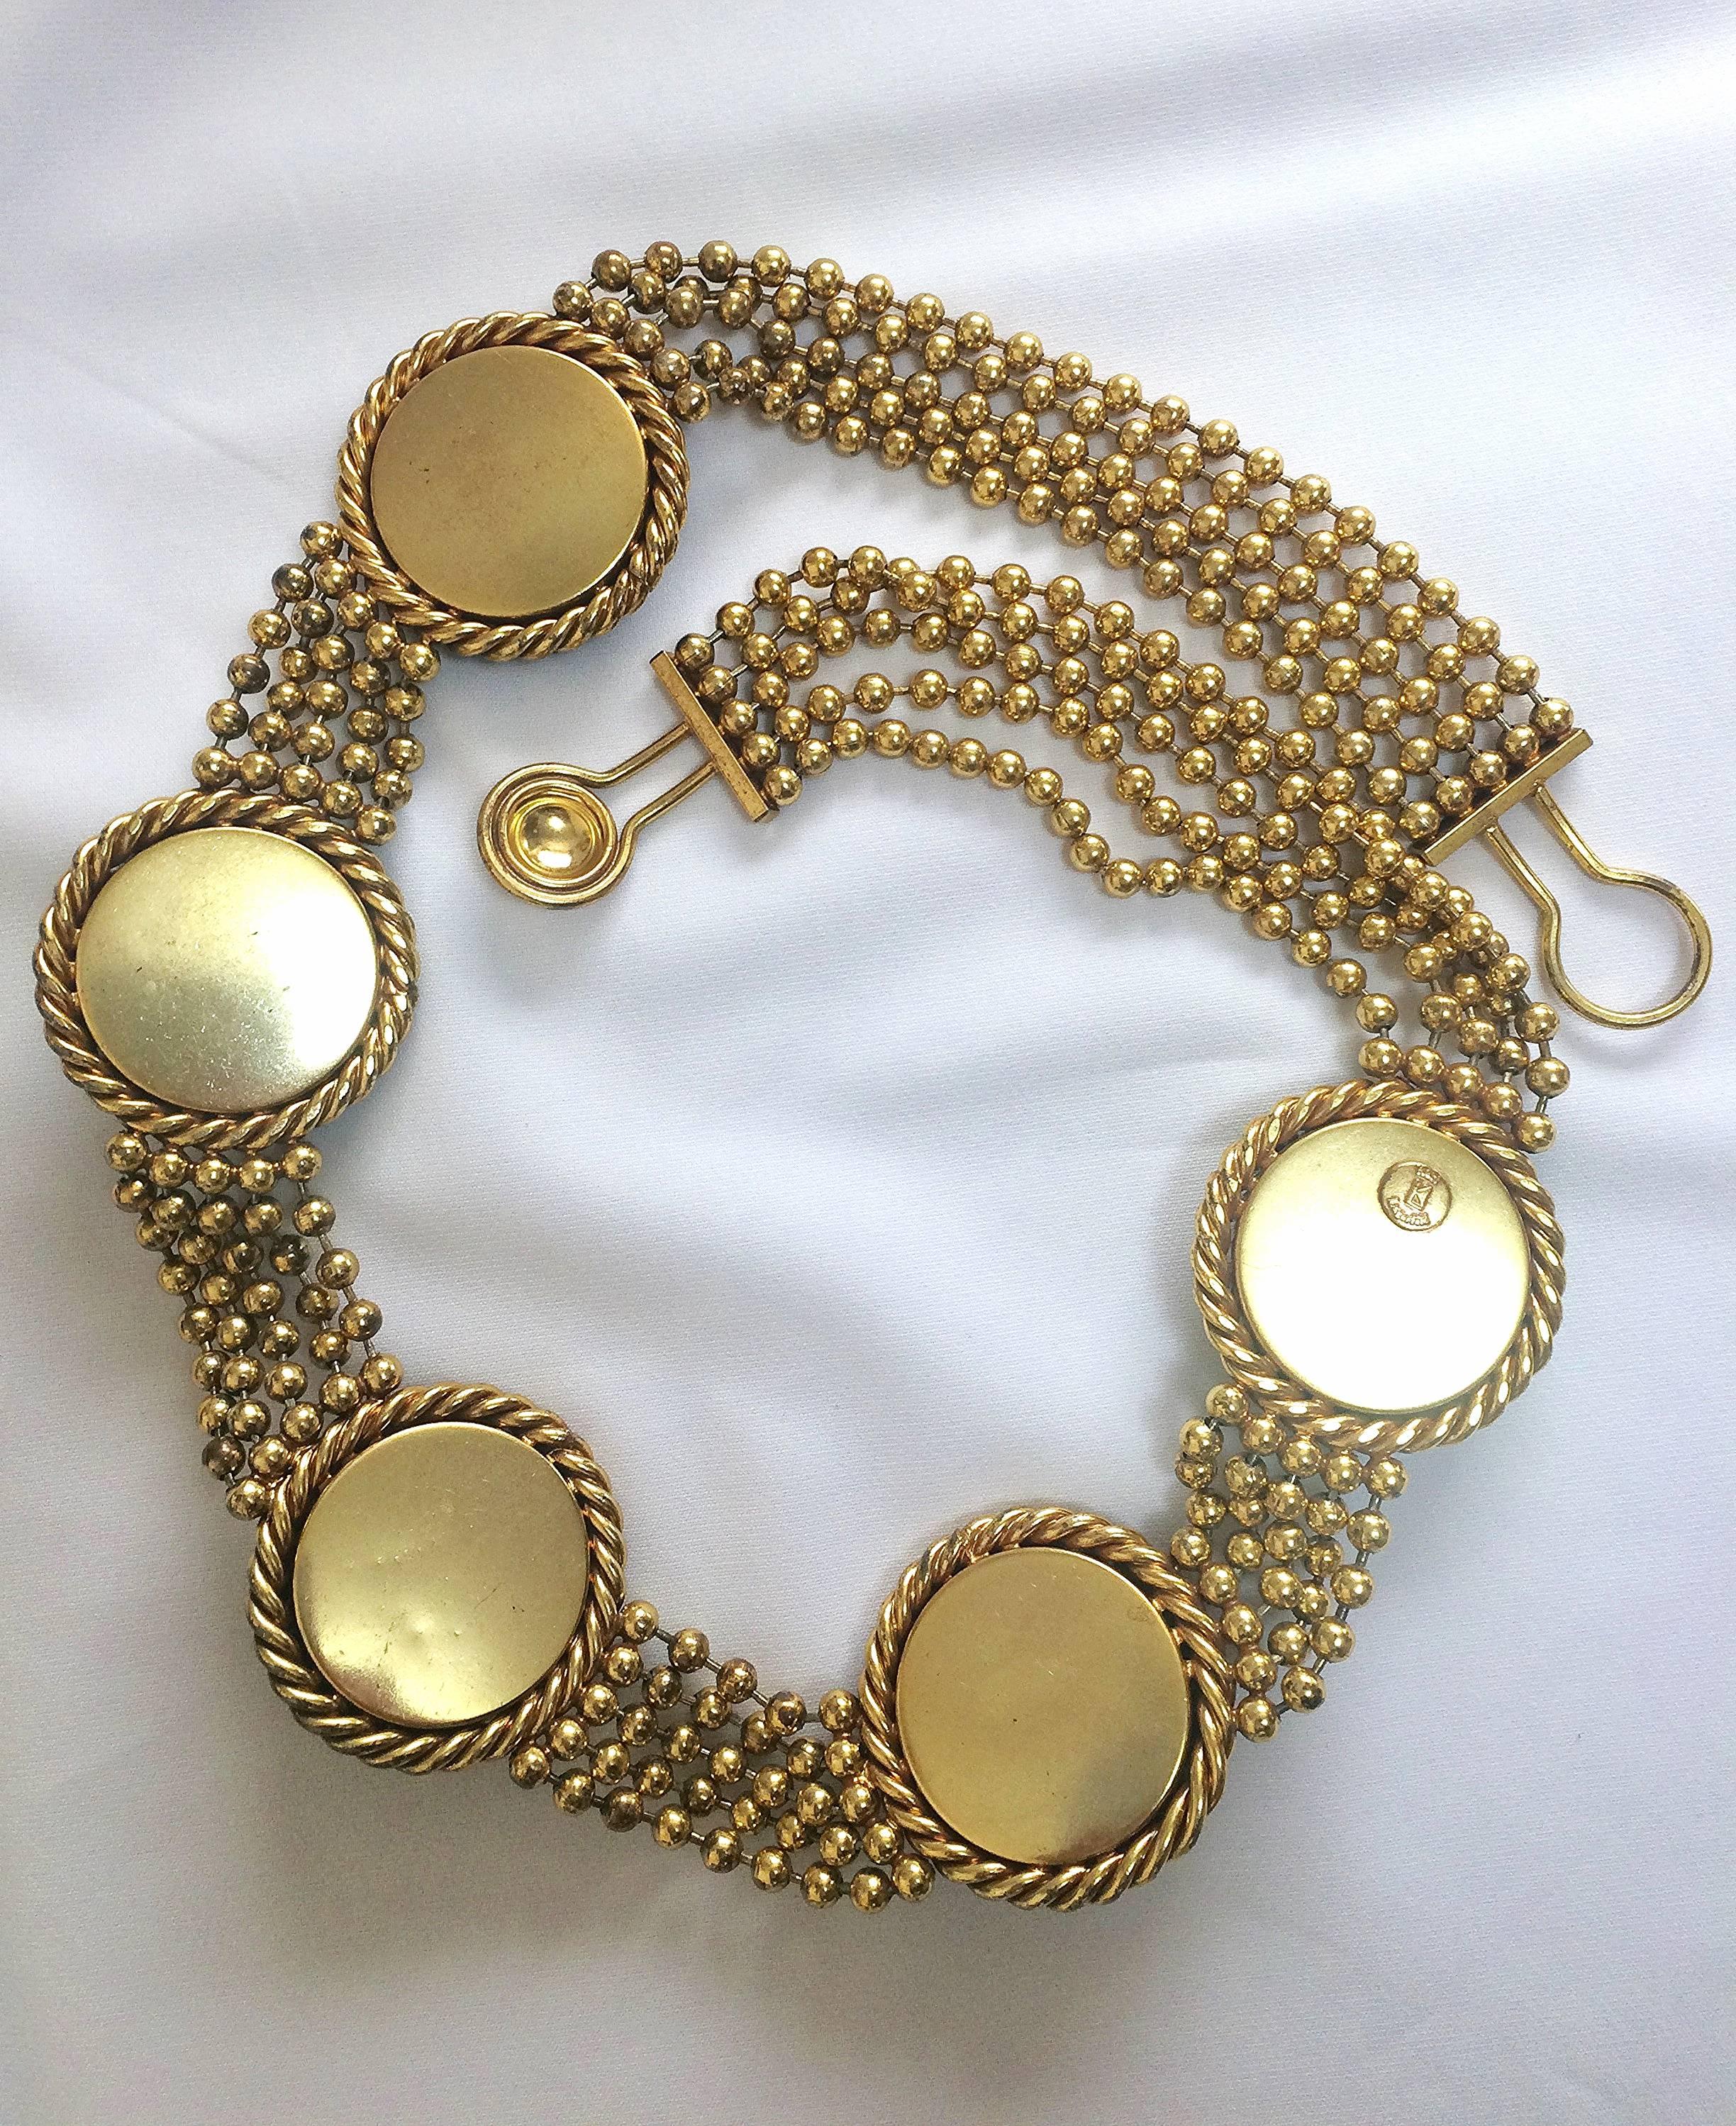 Vintage Karl Lagerfeld golden ball chain belt, necklace with extra large motifs. 2